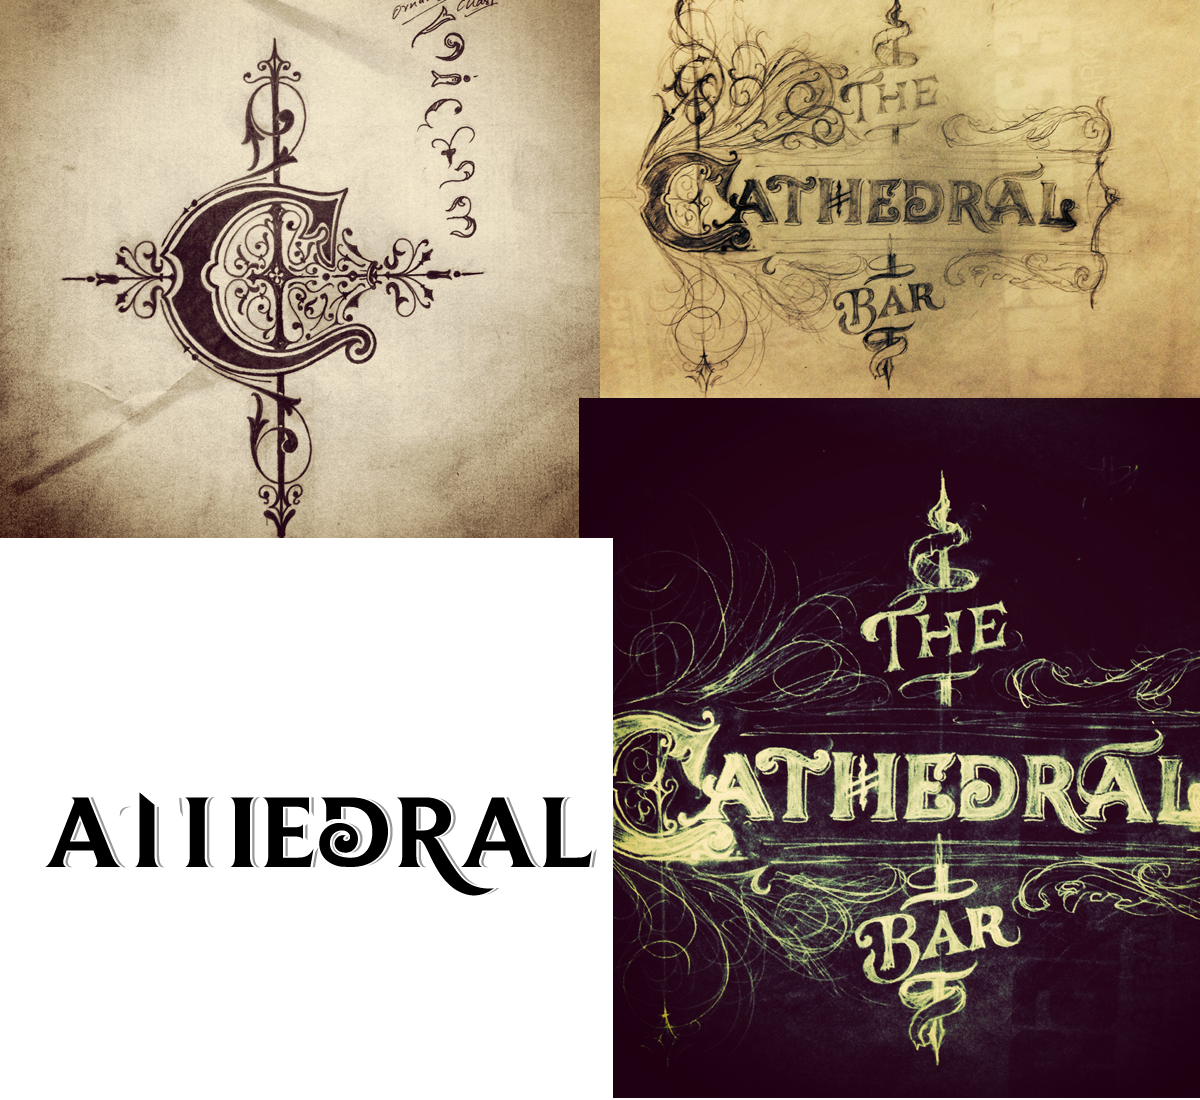 cathedral bar identity type lettering flourishes ornamental fleurons Collateral oakland design vintage Retro ephemera Renders